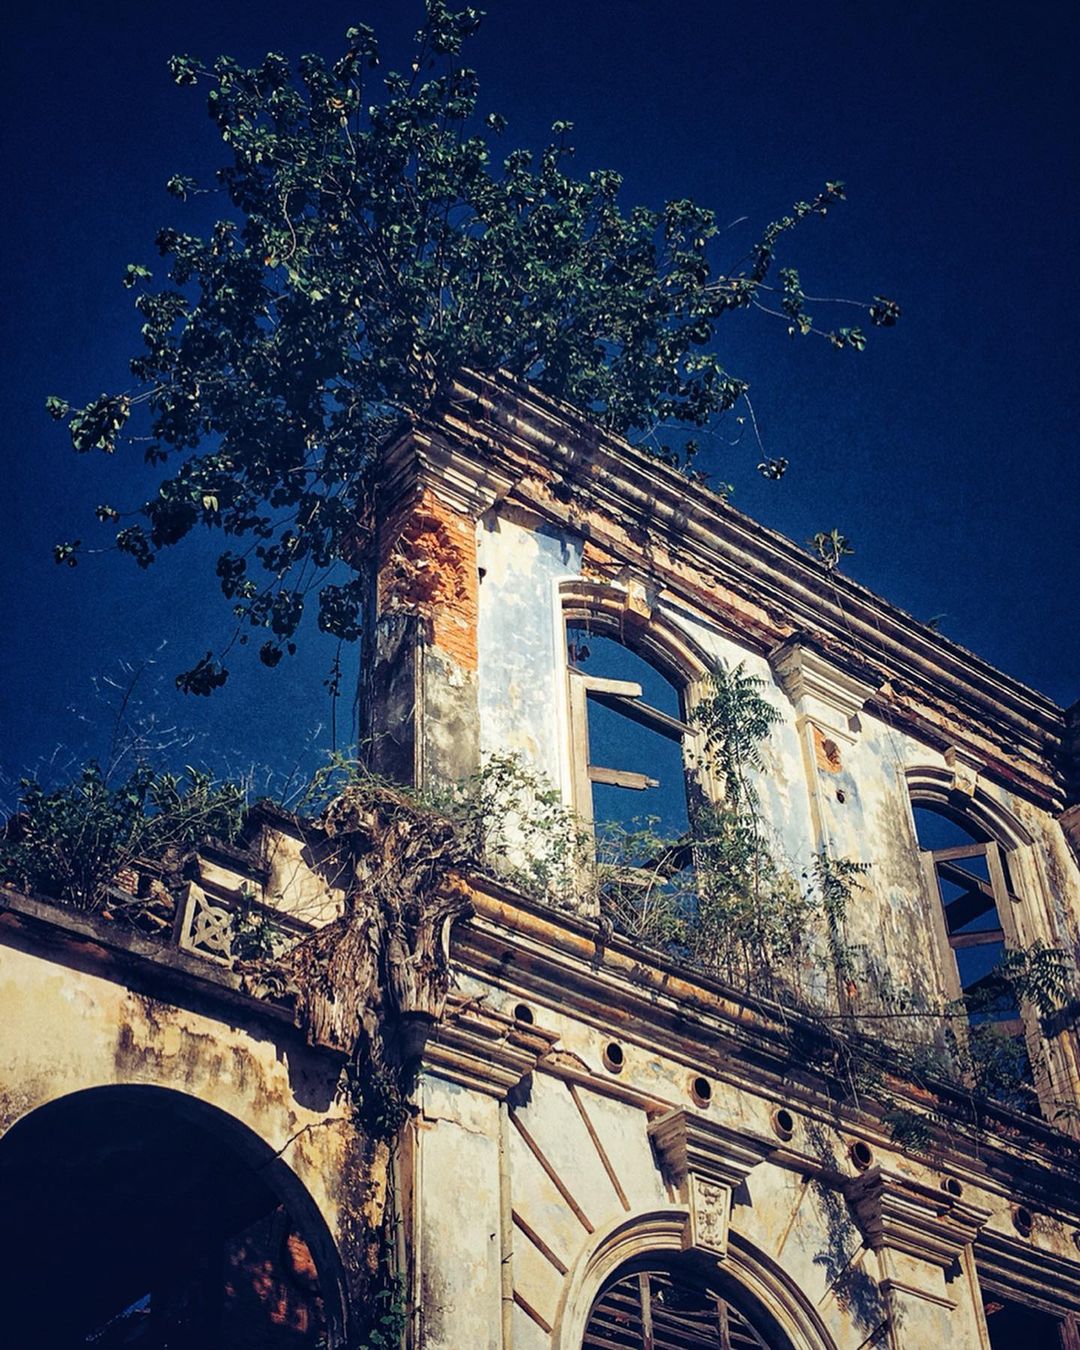 haunted places malaysia - shih chung branch school